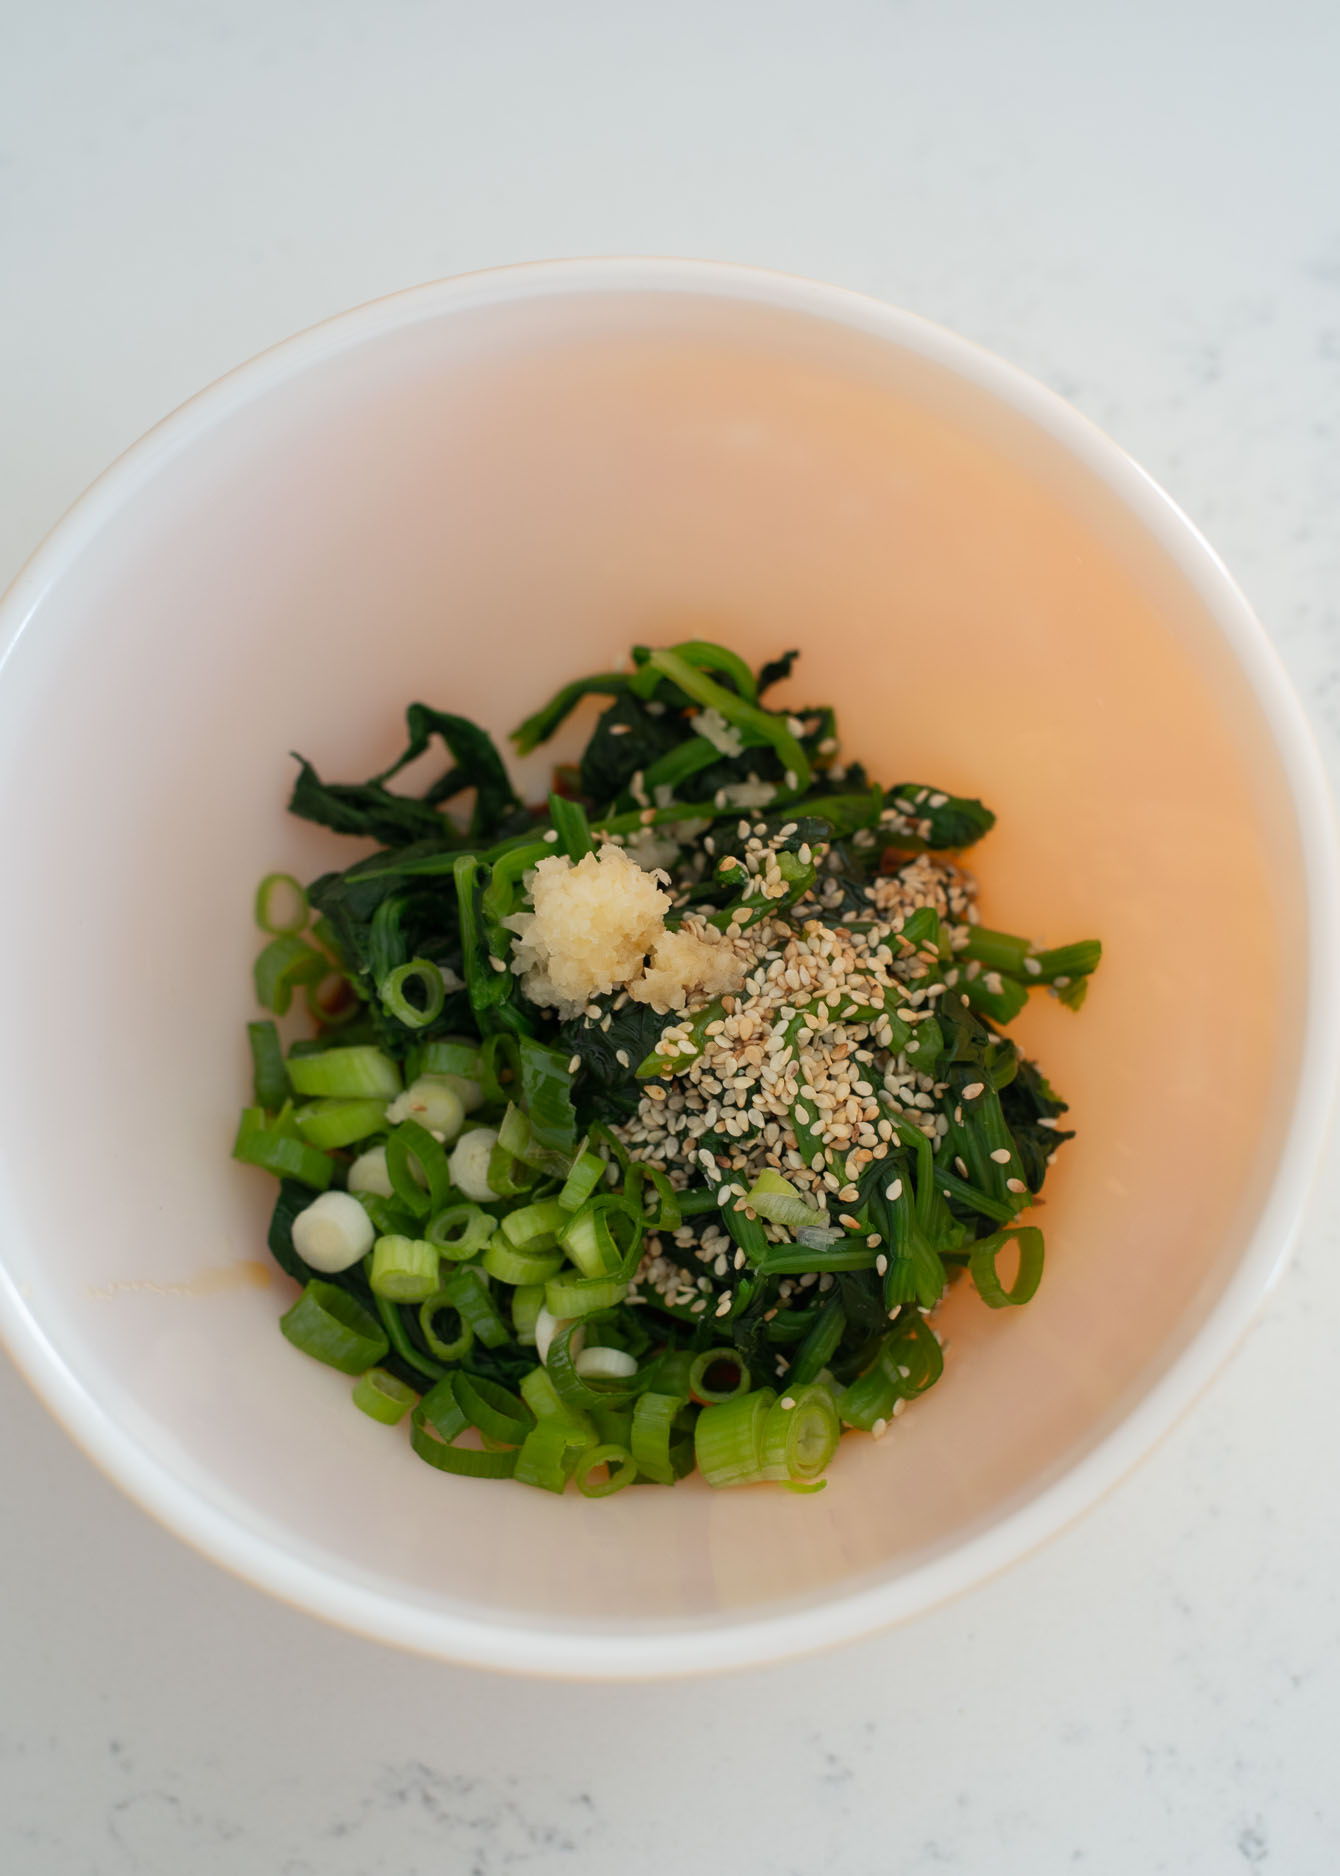 Blanched spinach is combined with Korean soy sauce seasoning in a bowl.